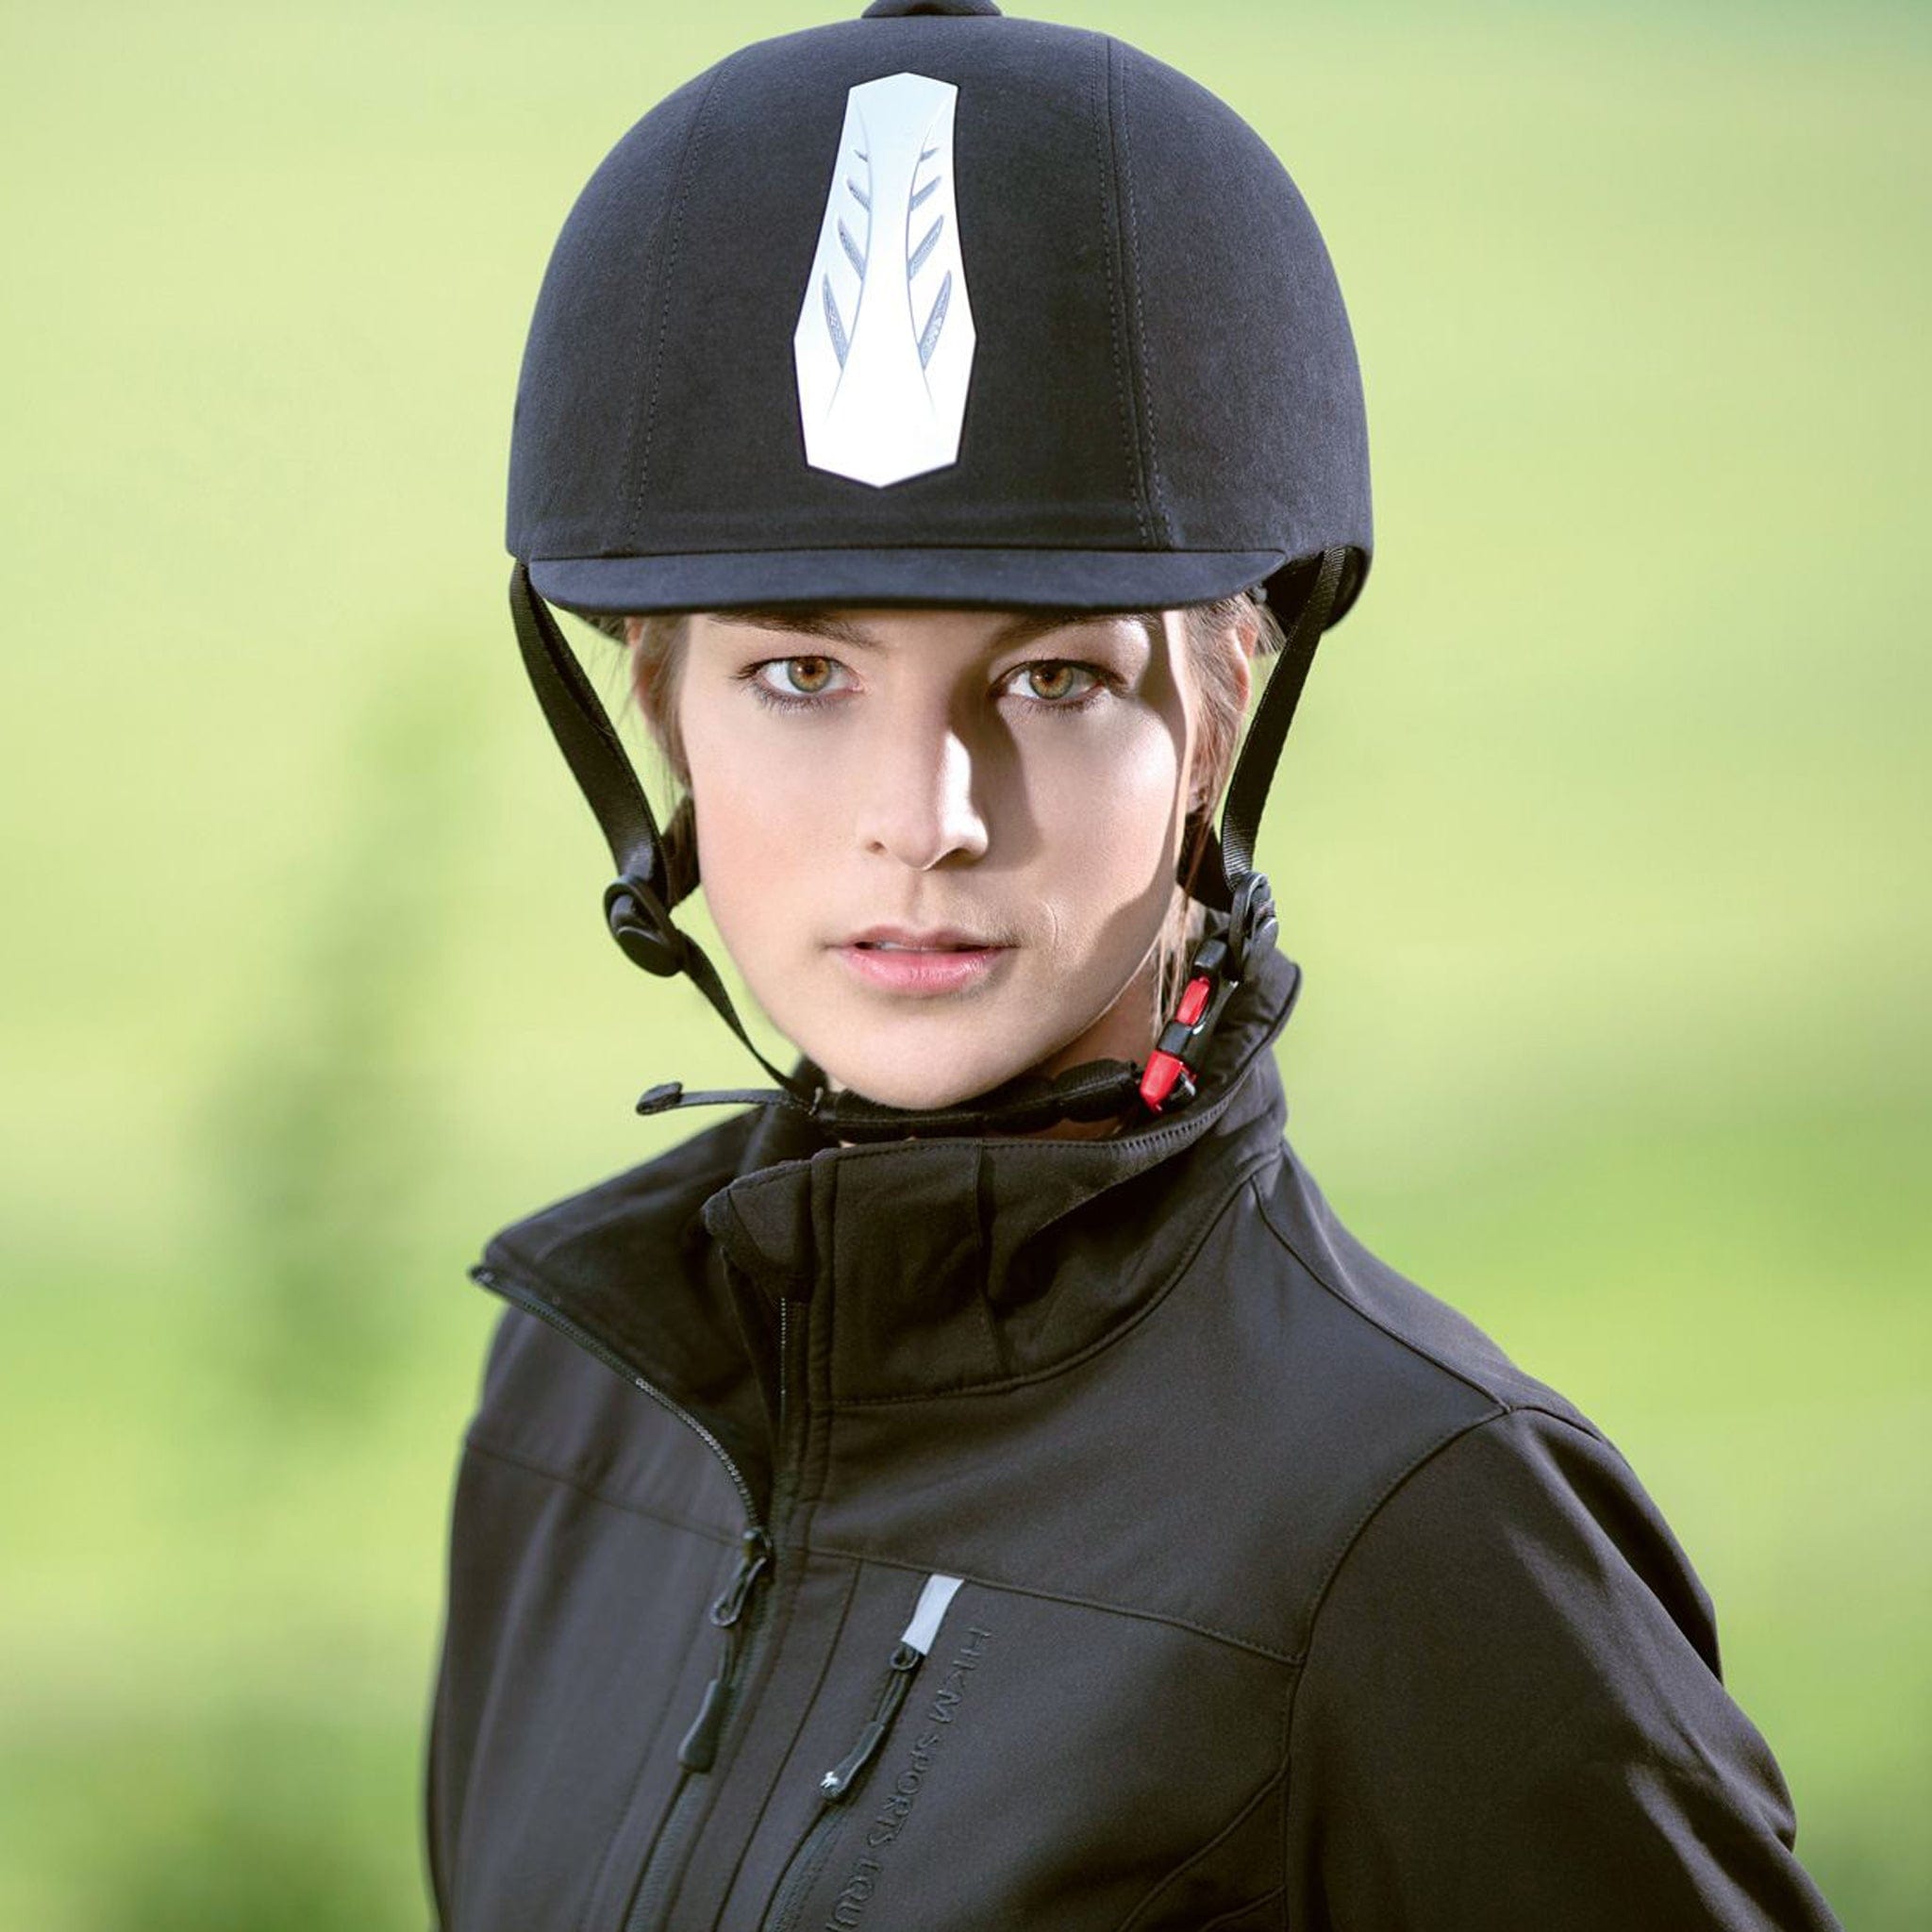 HKM Air Stripe Riding Hat 7886 Black and Silver On Rider